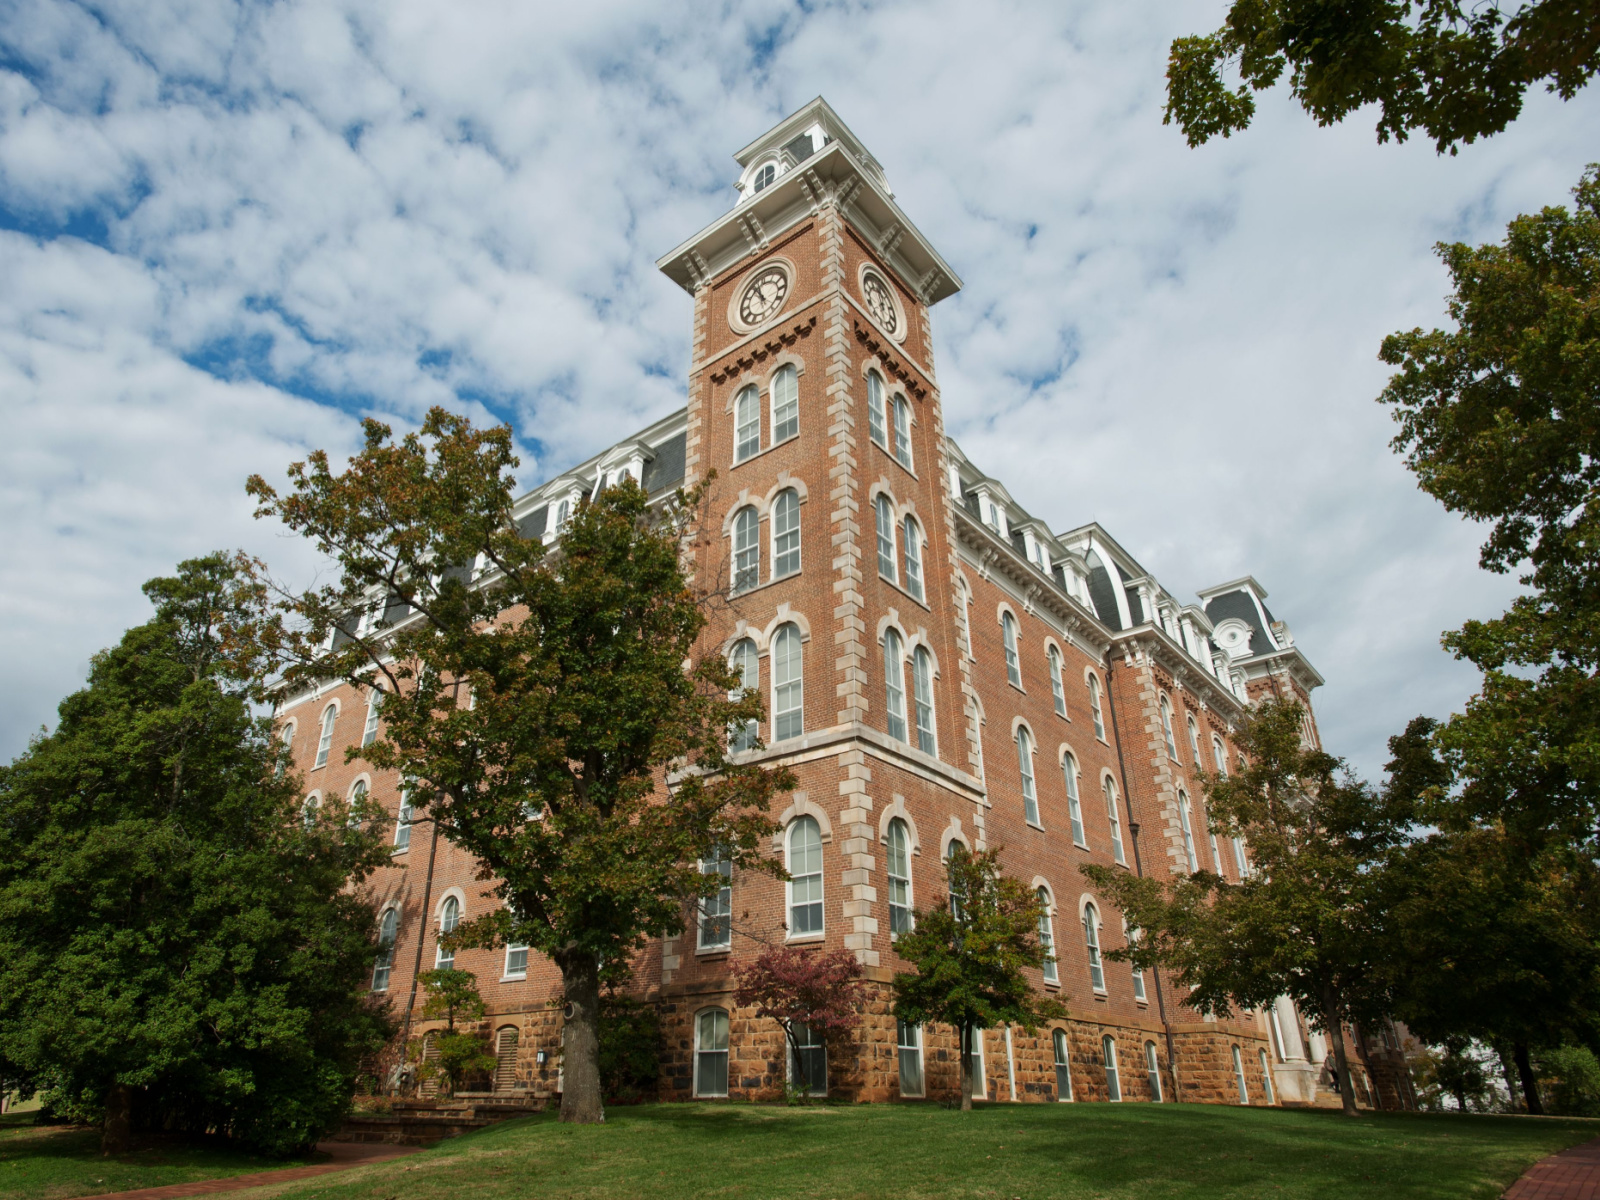 Old Main Building on the campus of the University of Arkansas